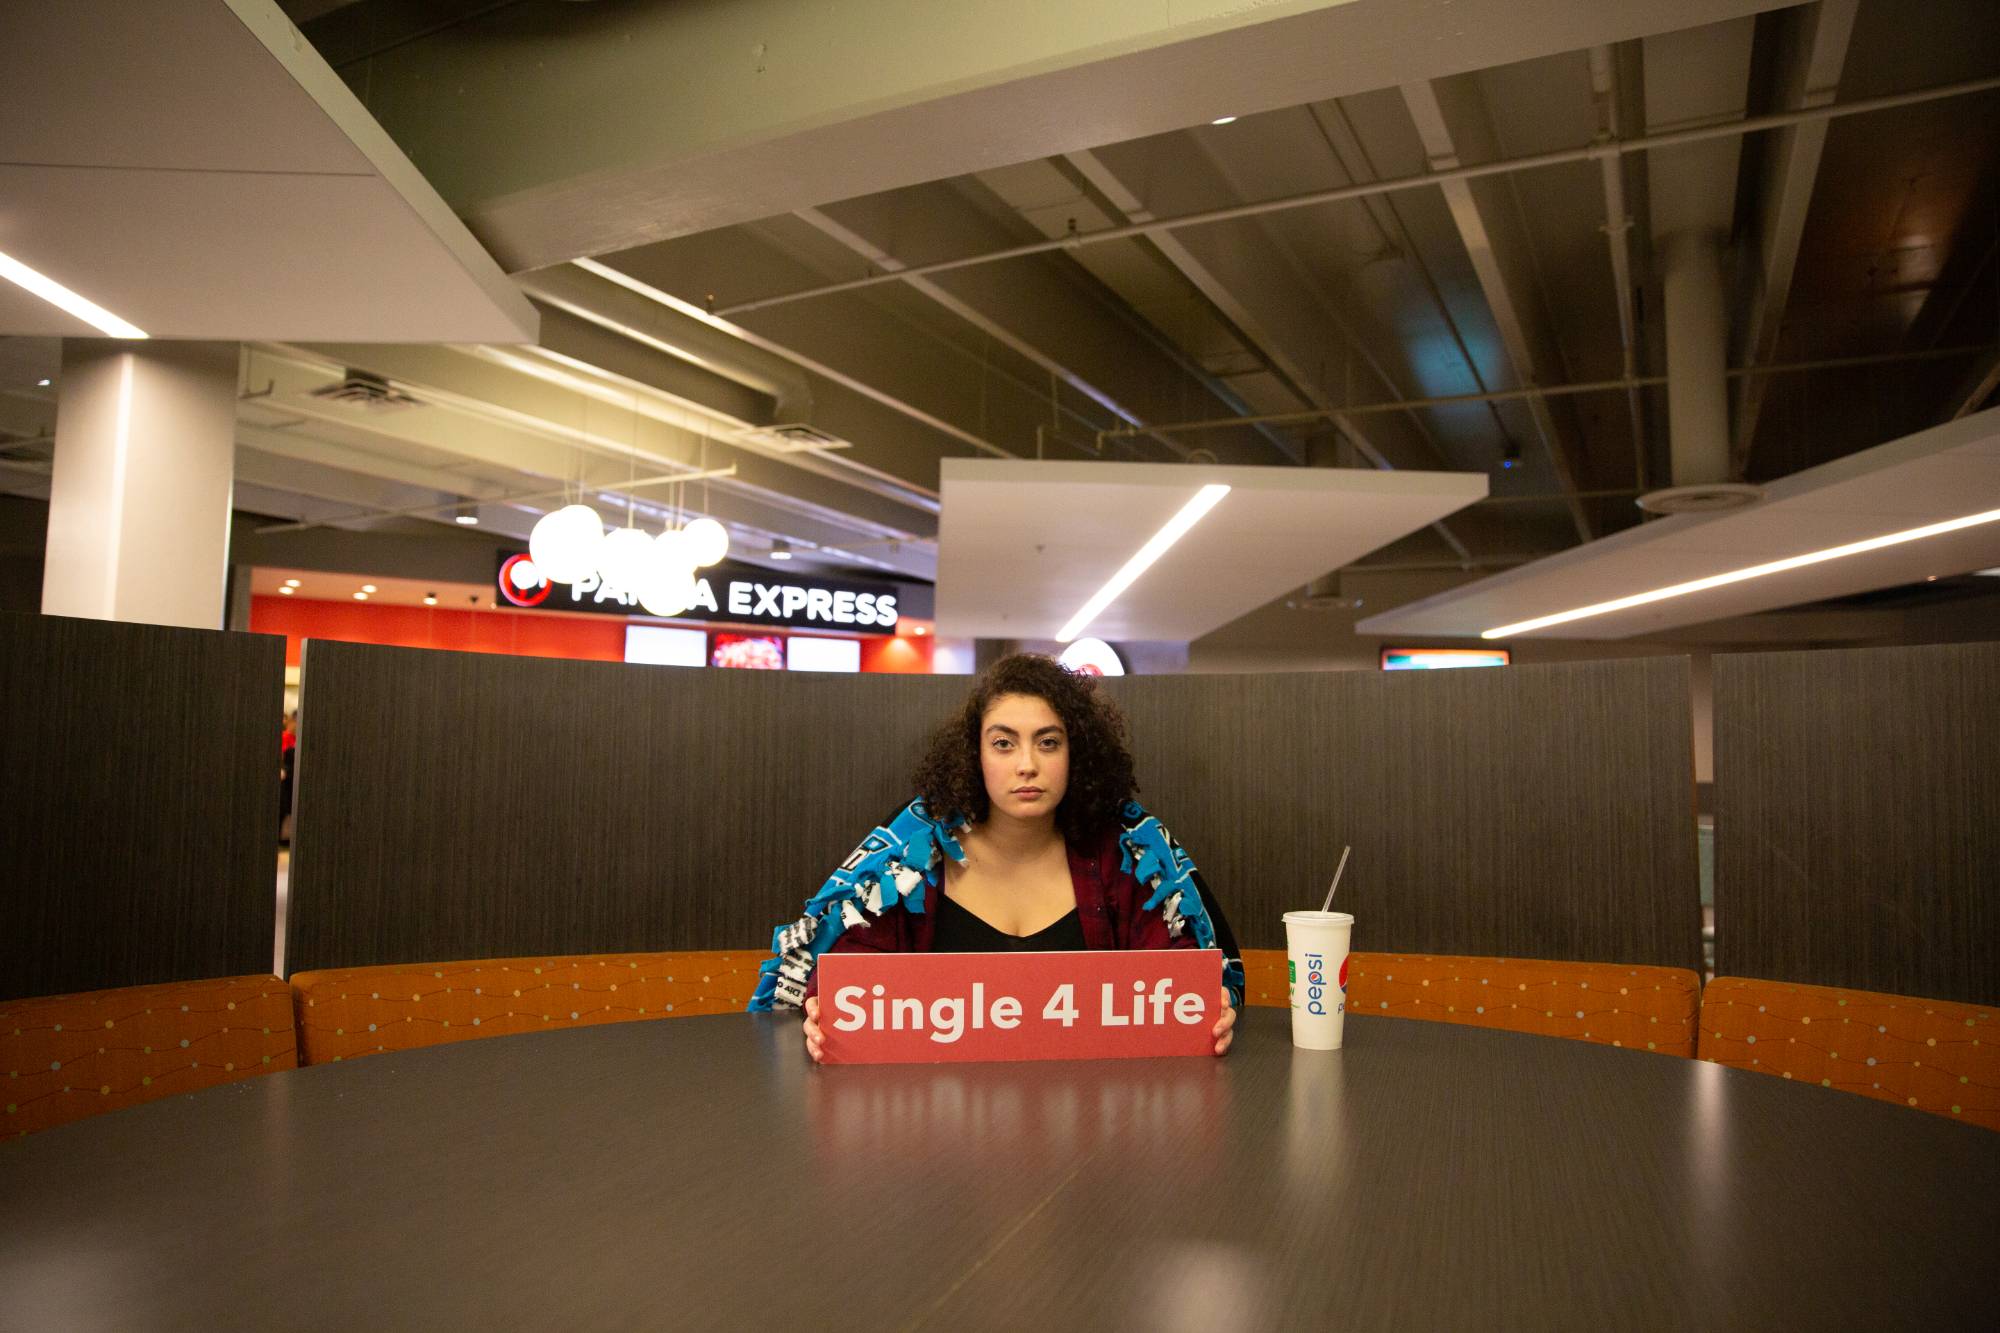 Student sitting alone at a table with a sign labeled "Single 4 life"